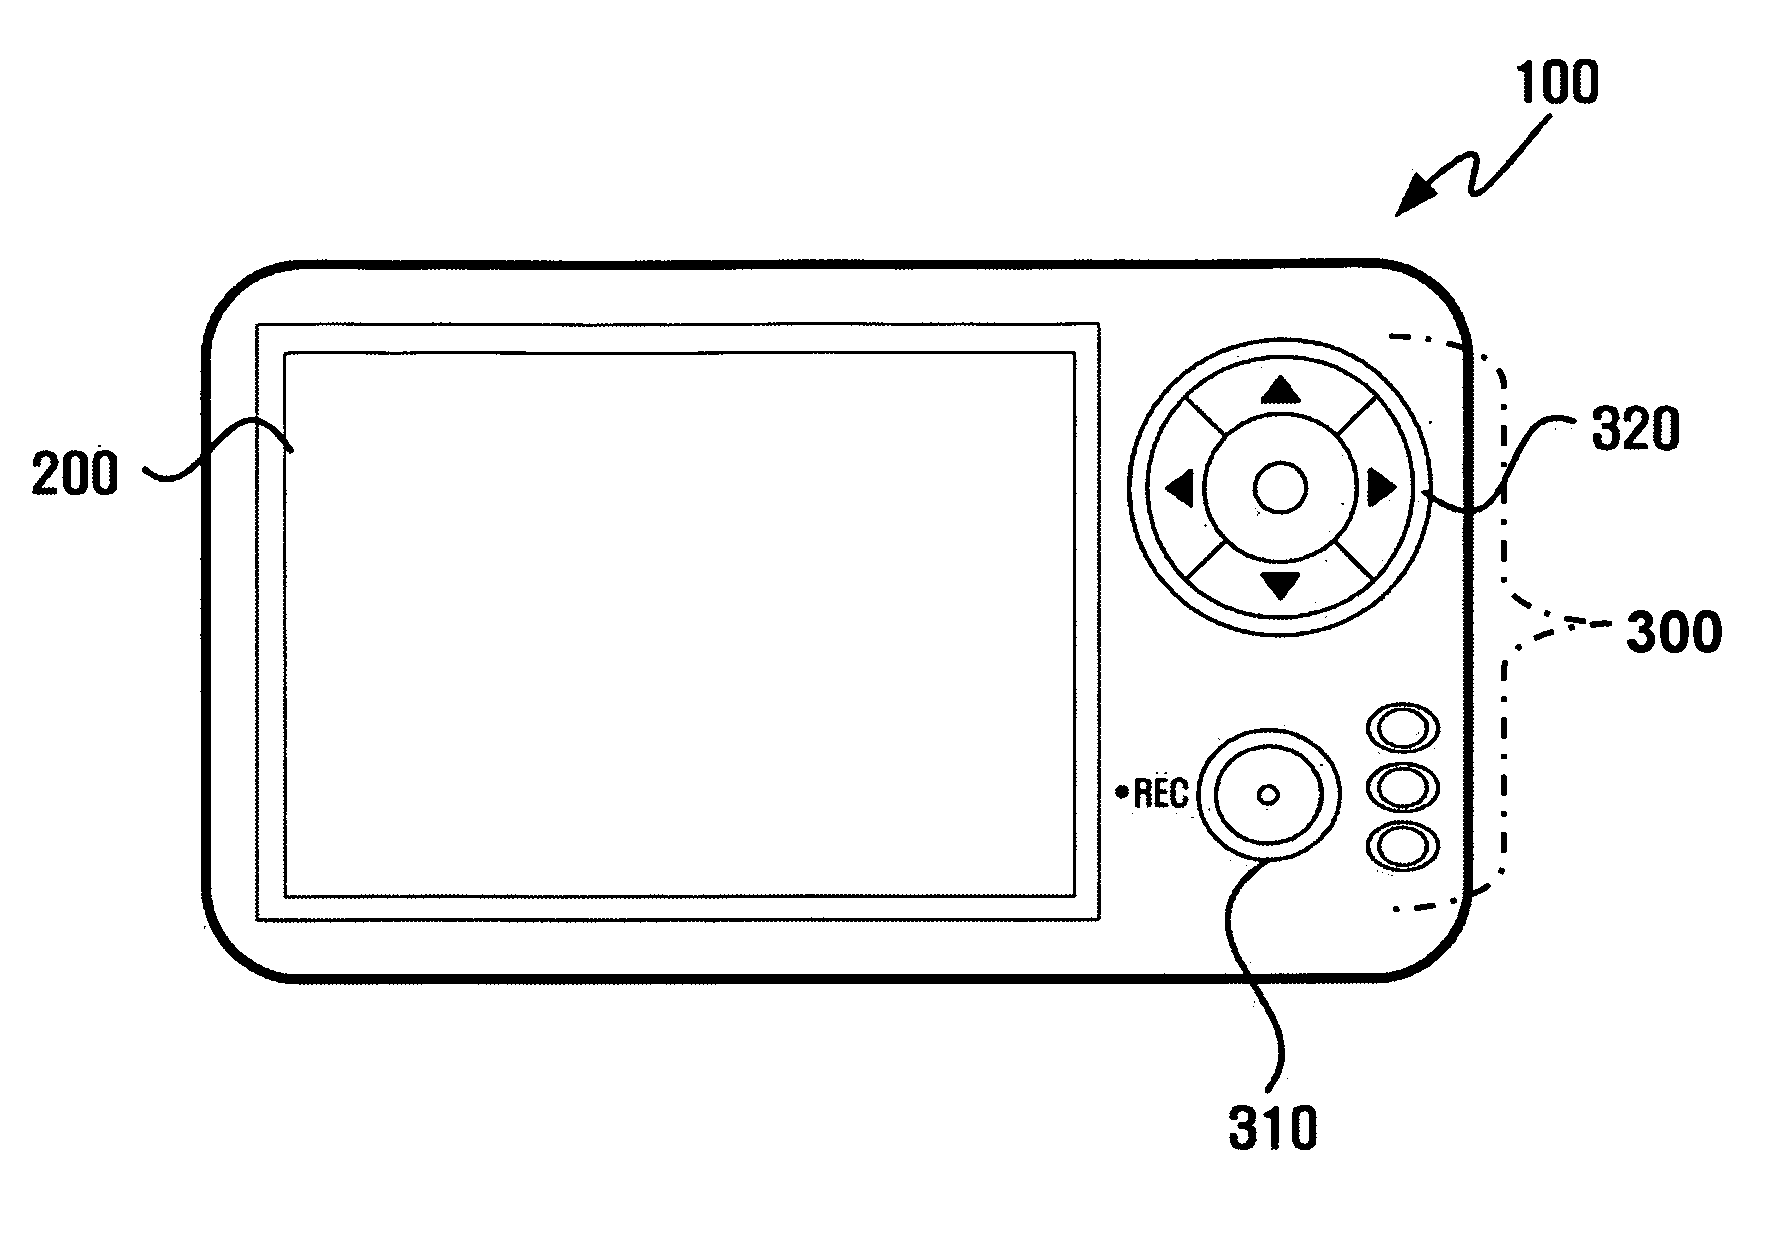 Apparatus to provide a screen capturing function and a method of providing the screen capturing function